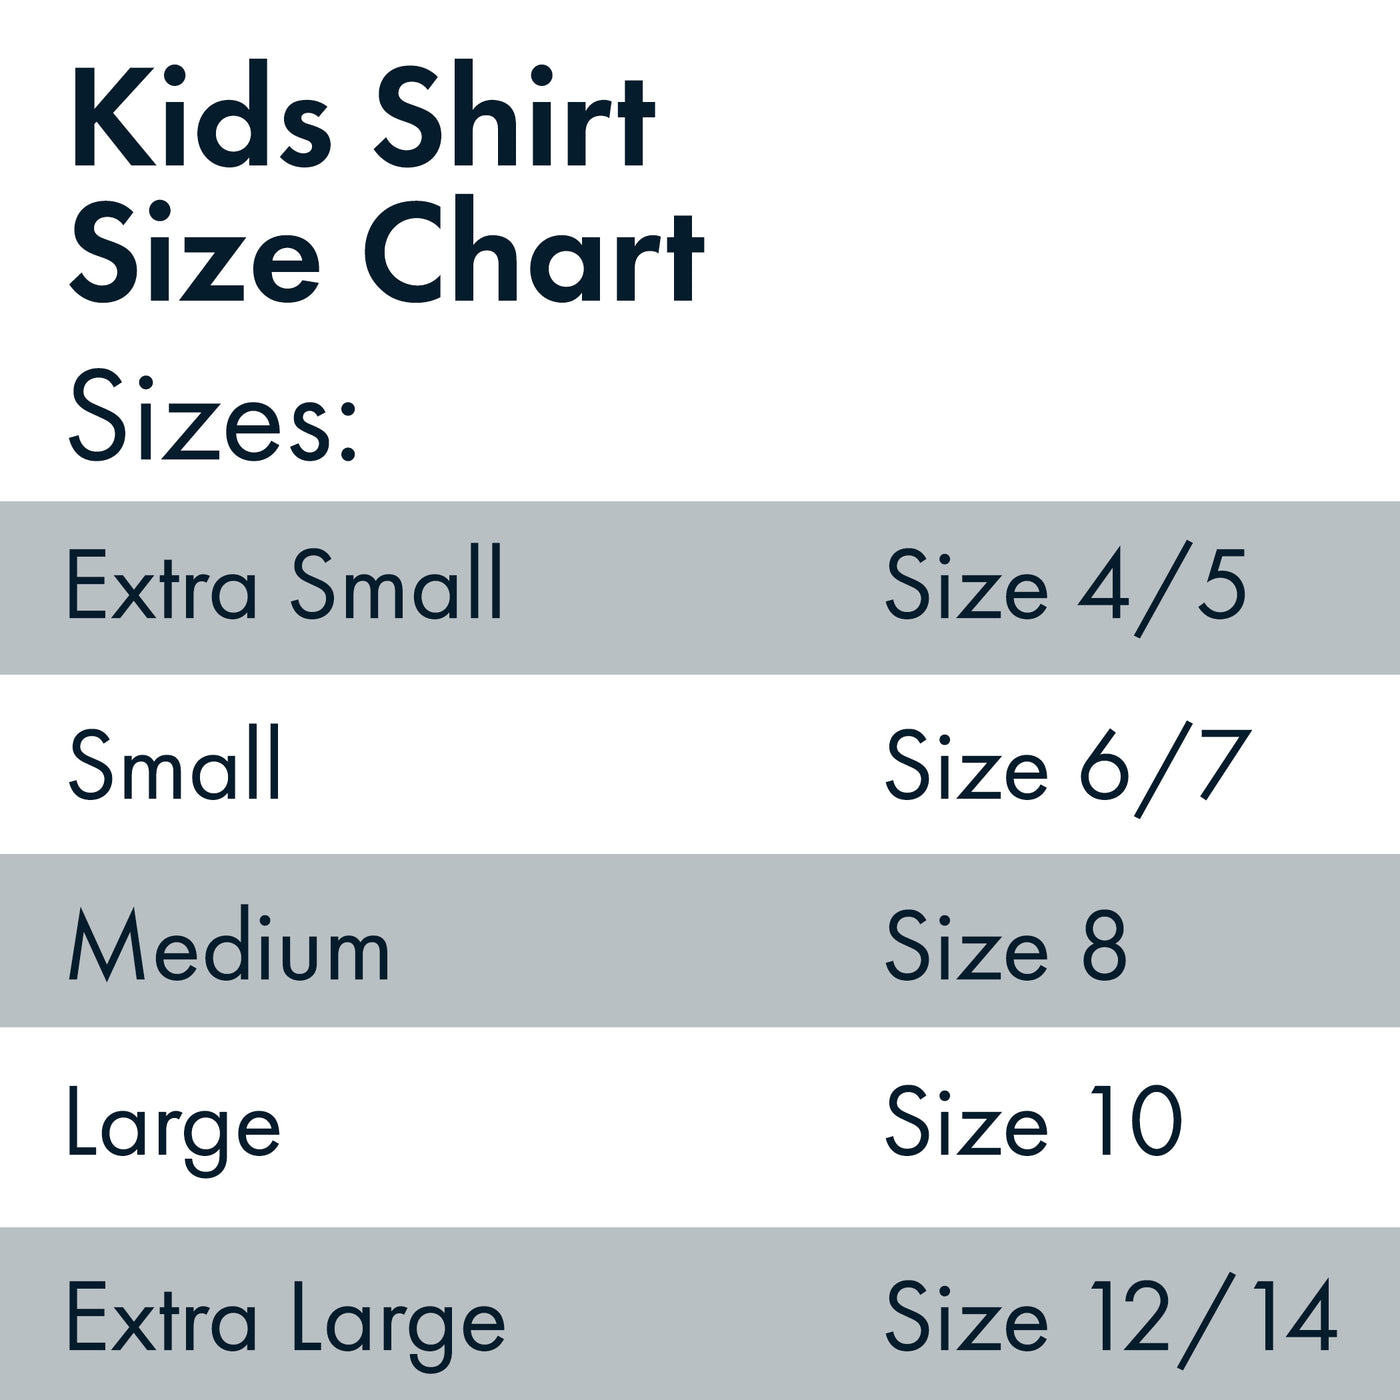 Kids size chart. extra small is sizes 4 to 5. small is sizes 6 to 7. medium is size 8. large is size 10. extra large is sizes 12 to 14.